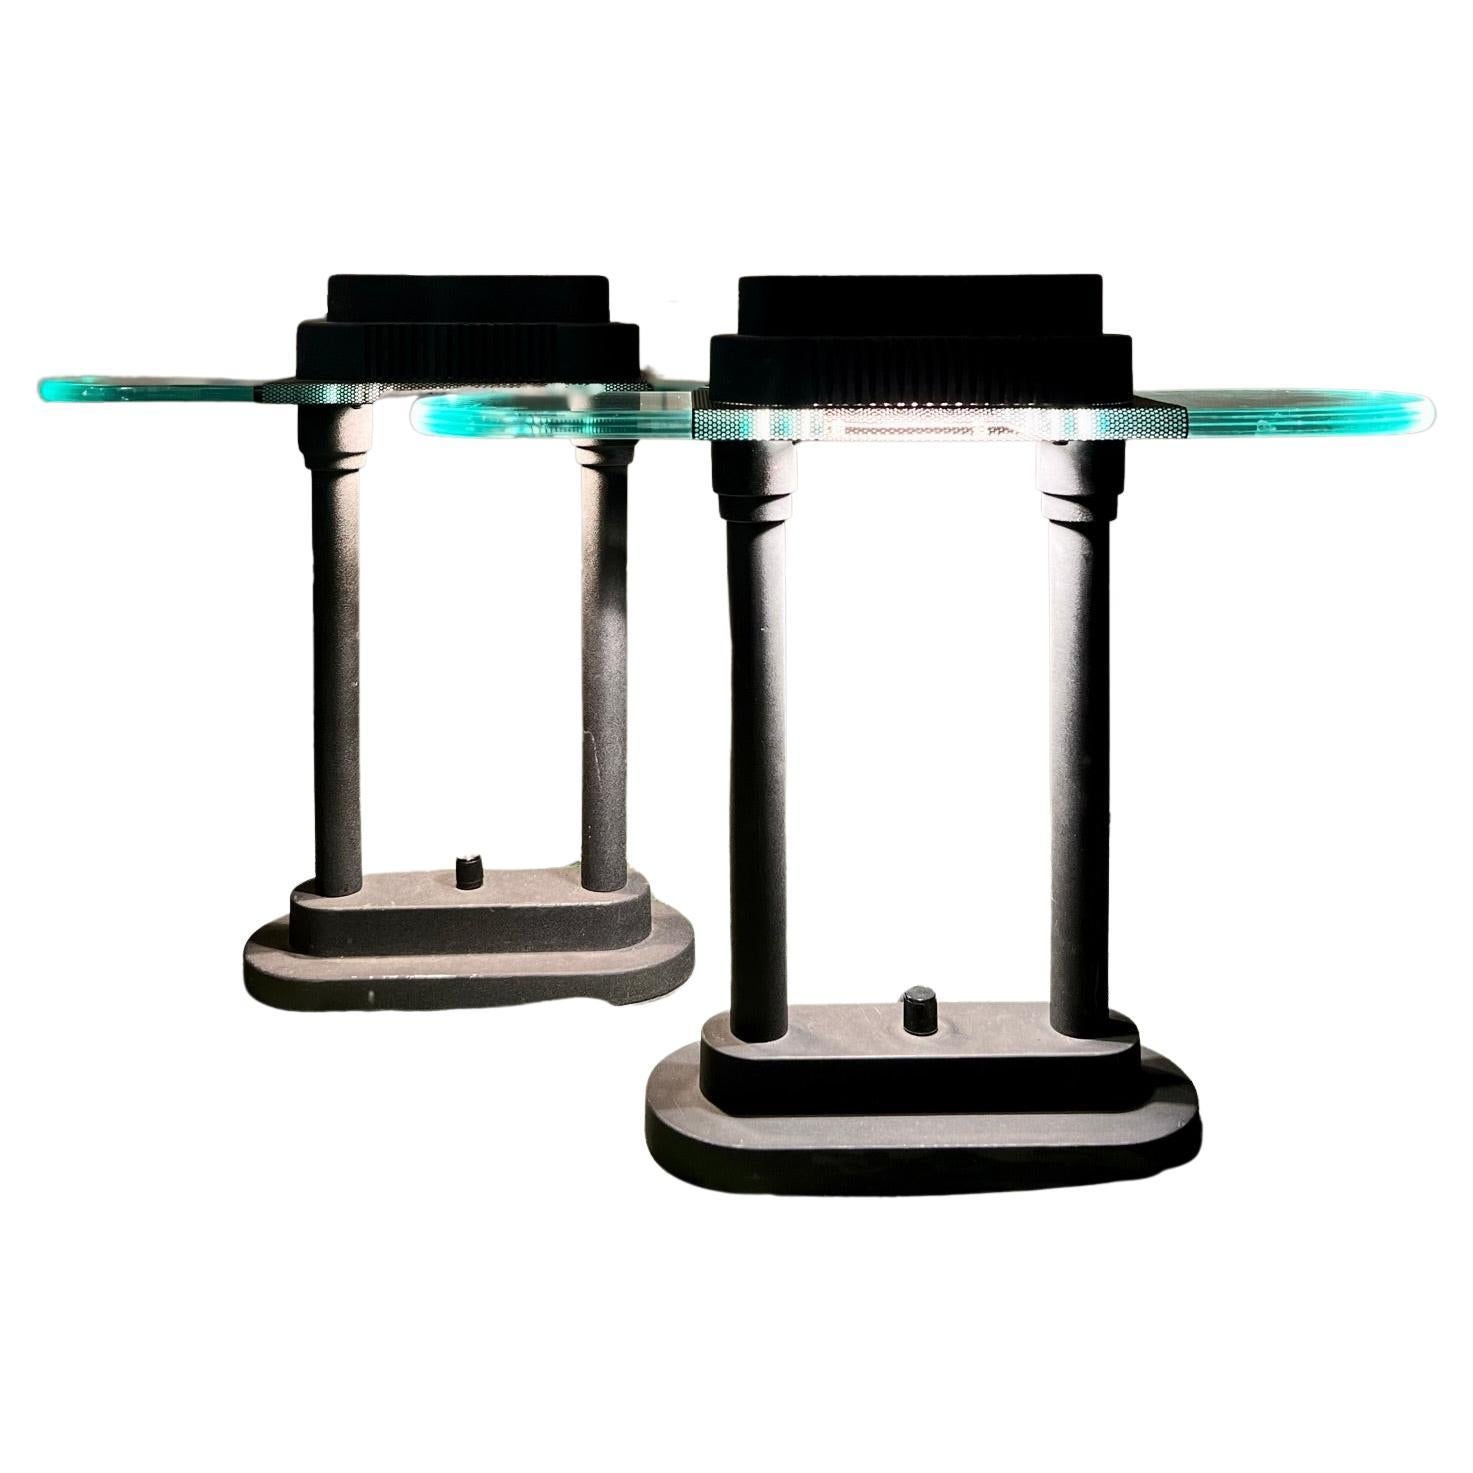 1980s, Black Dimmable Halogen Desk Lamps in the Style of Sonneman for Kovacs